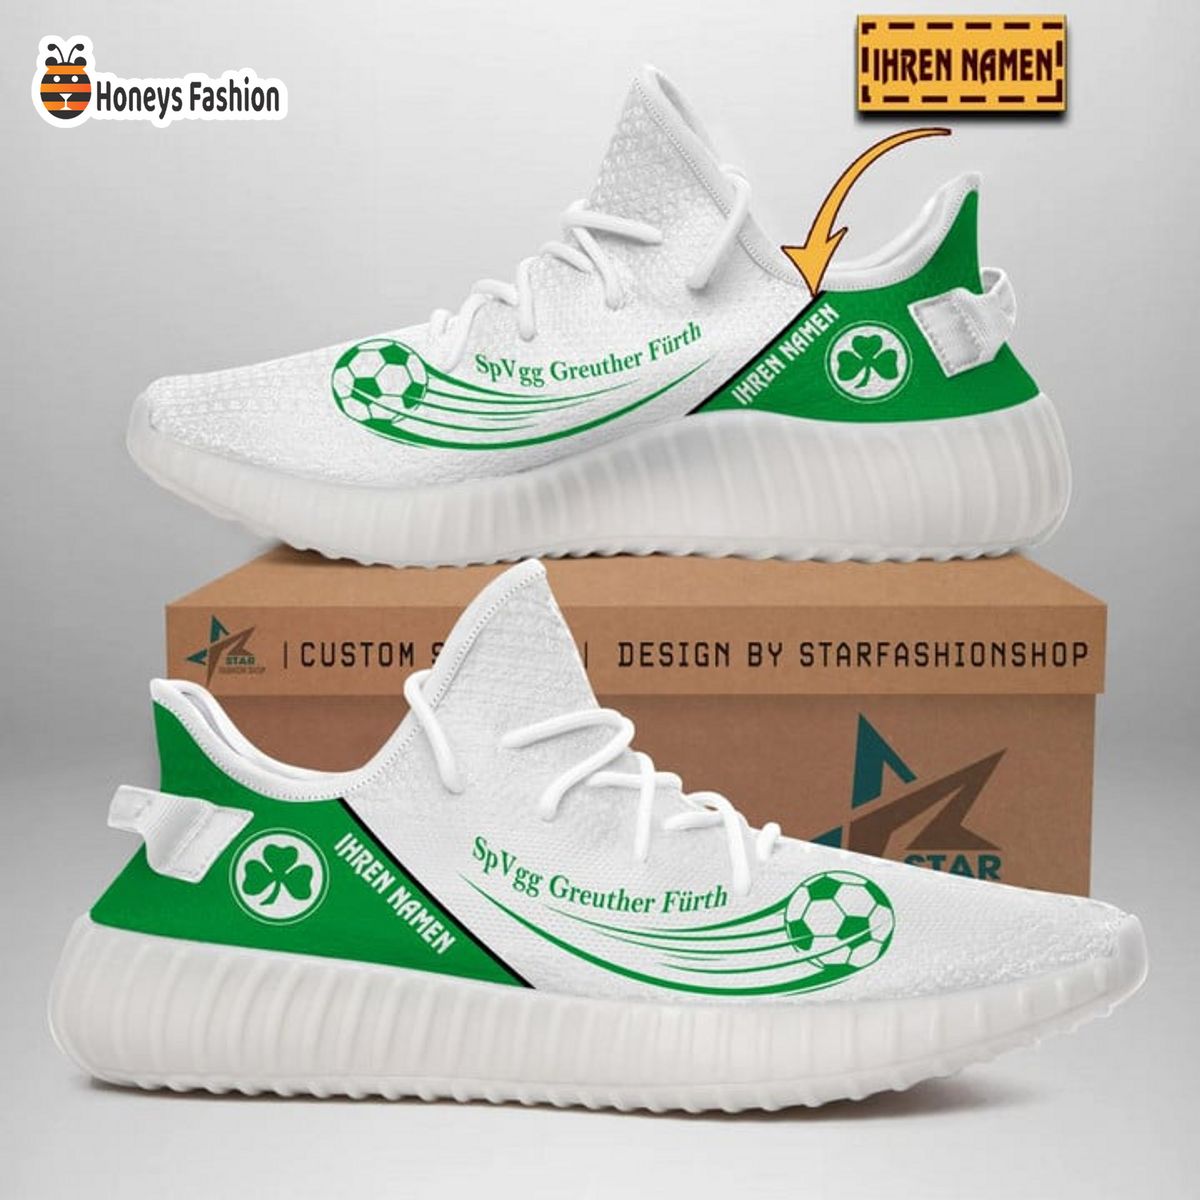 SpVgg Greuther Furth personalisiert yeezy sneaker